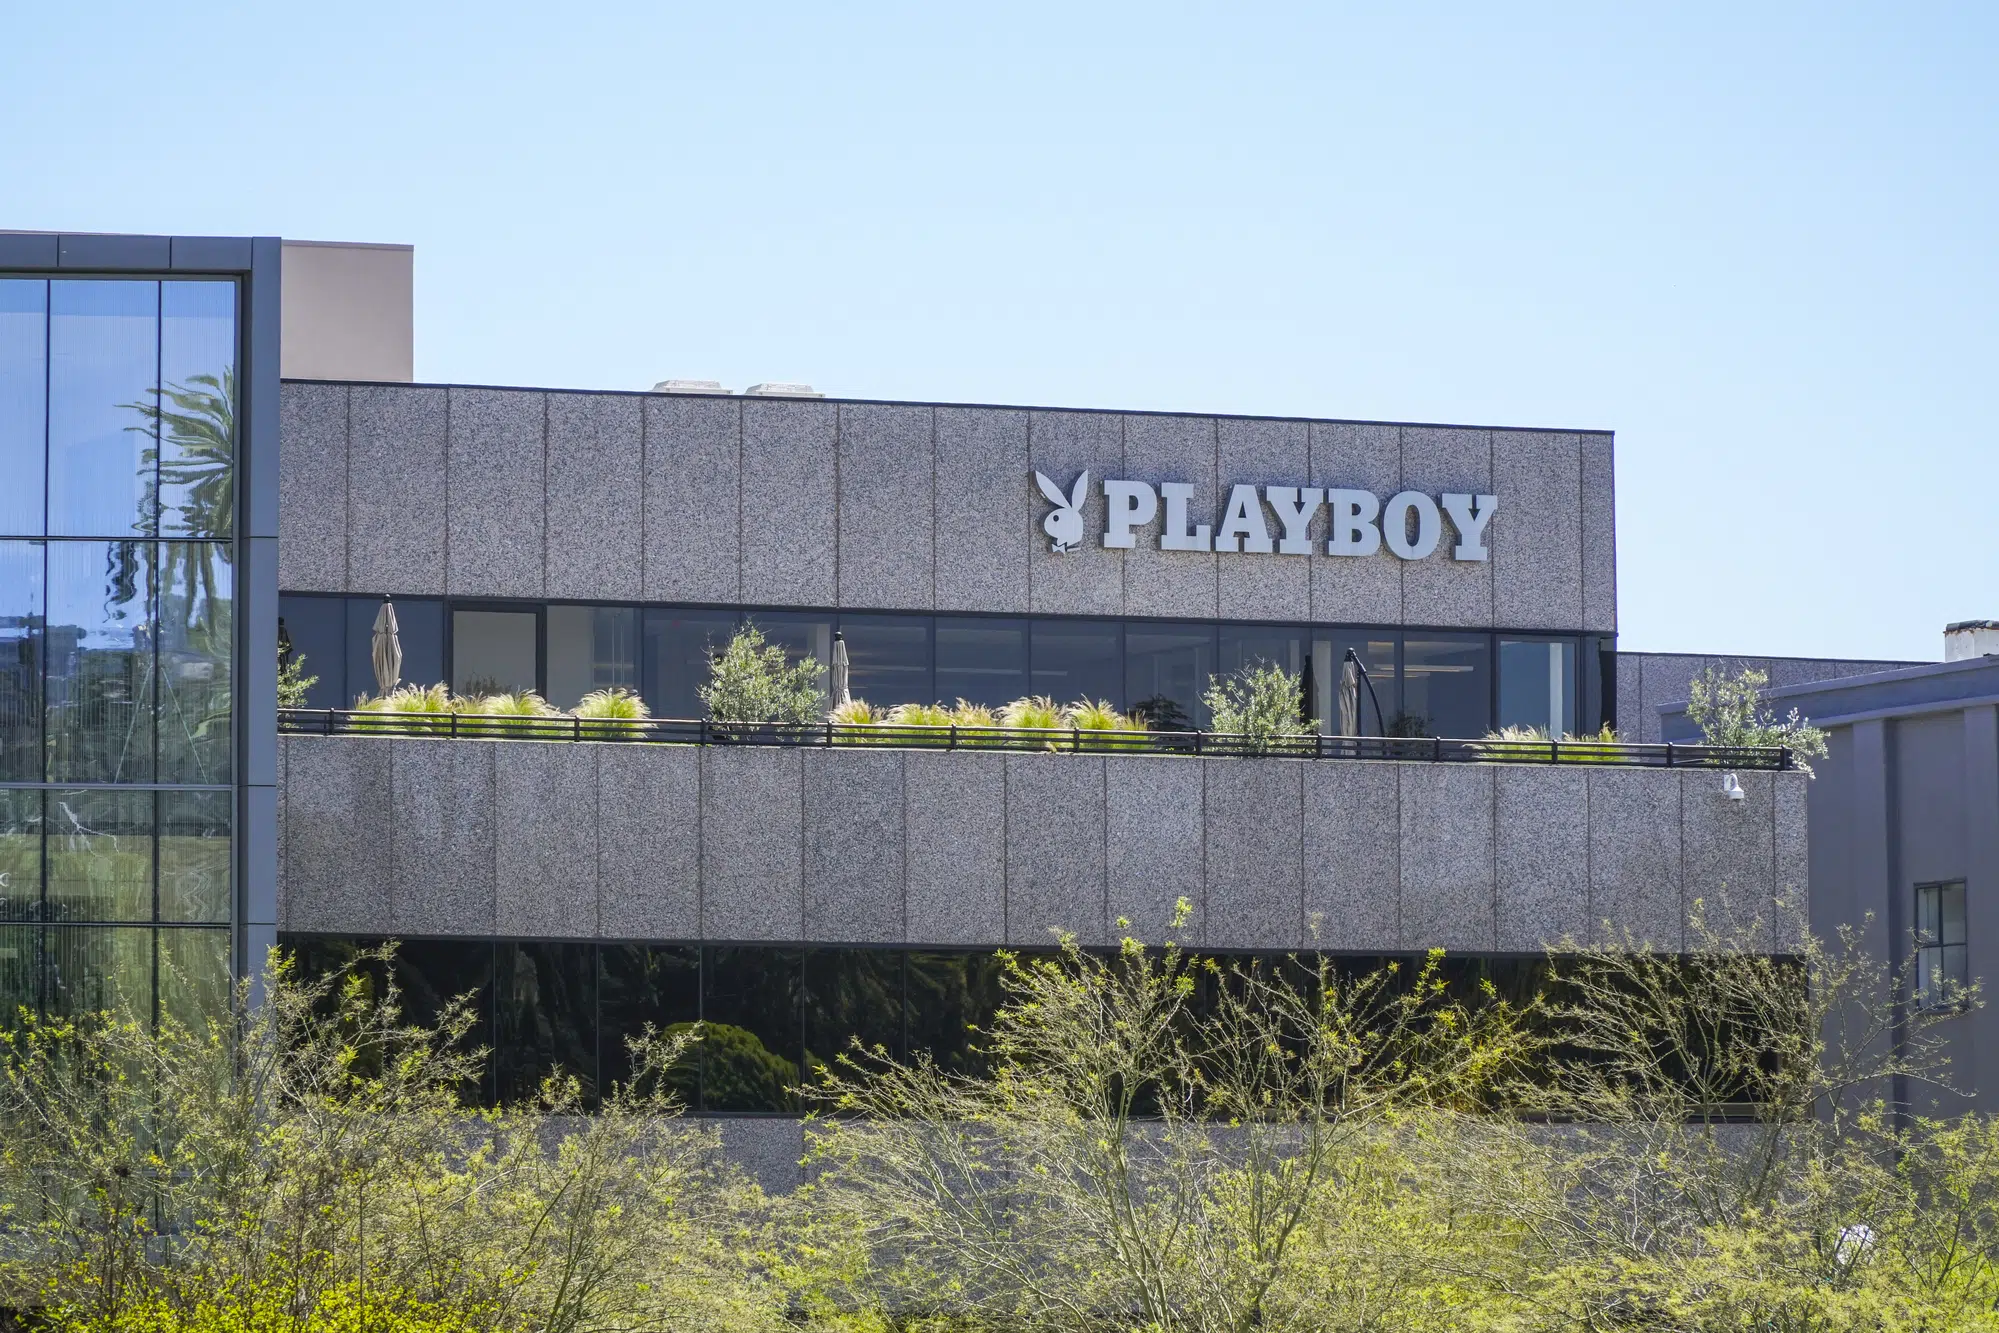 Playboy Headquarter in Beverly Hills Los Angeles - LOS ANGELES - CALIFORNIA - APRIL 20, 2017